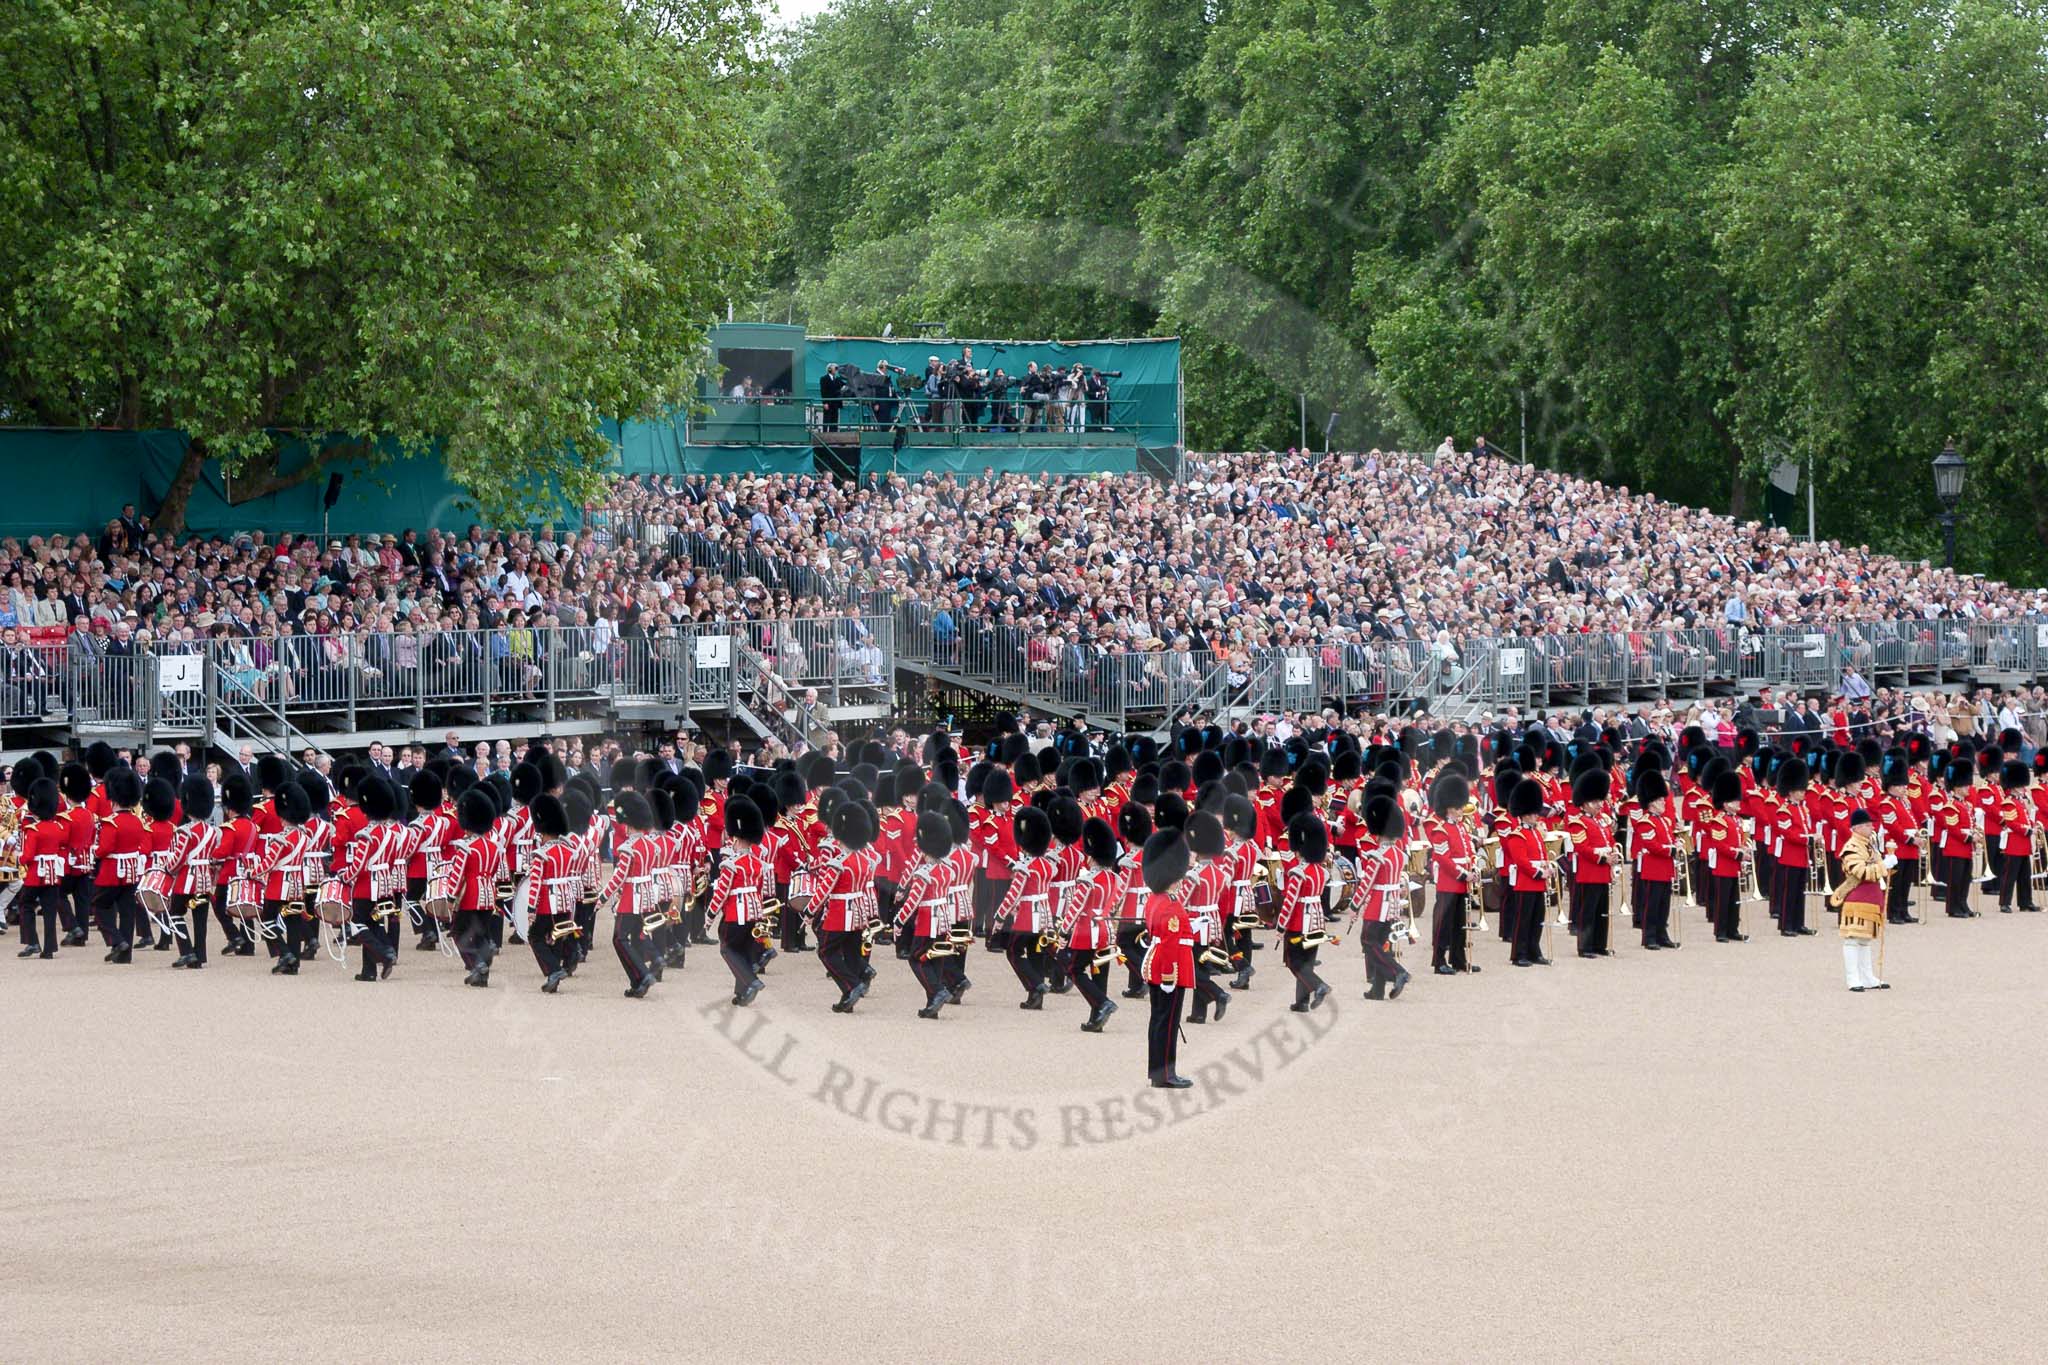 Trooping the Colour 2010: The Band of the Grenadier Guards is marching into their starting position for the parade.

The Colour Sergeant (bottom middle) is observing the proceedings.

The bands of the Irish Guards (blue plumes on the bearskins) and Coldstream Guards (red plumes) have already taken their positions.

The public stands behind the bands are at the rear of the garden of No. 10 Downing Street..
Horse Guards Parade, Westminster,
London SW1,
Greater London,
United Kingdom,
on 12 June 2010 at 10:32, image #17